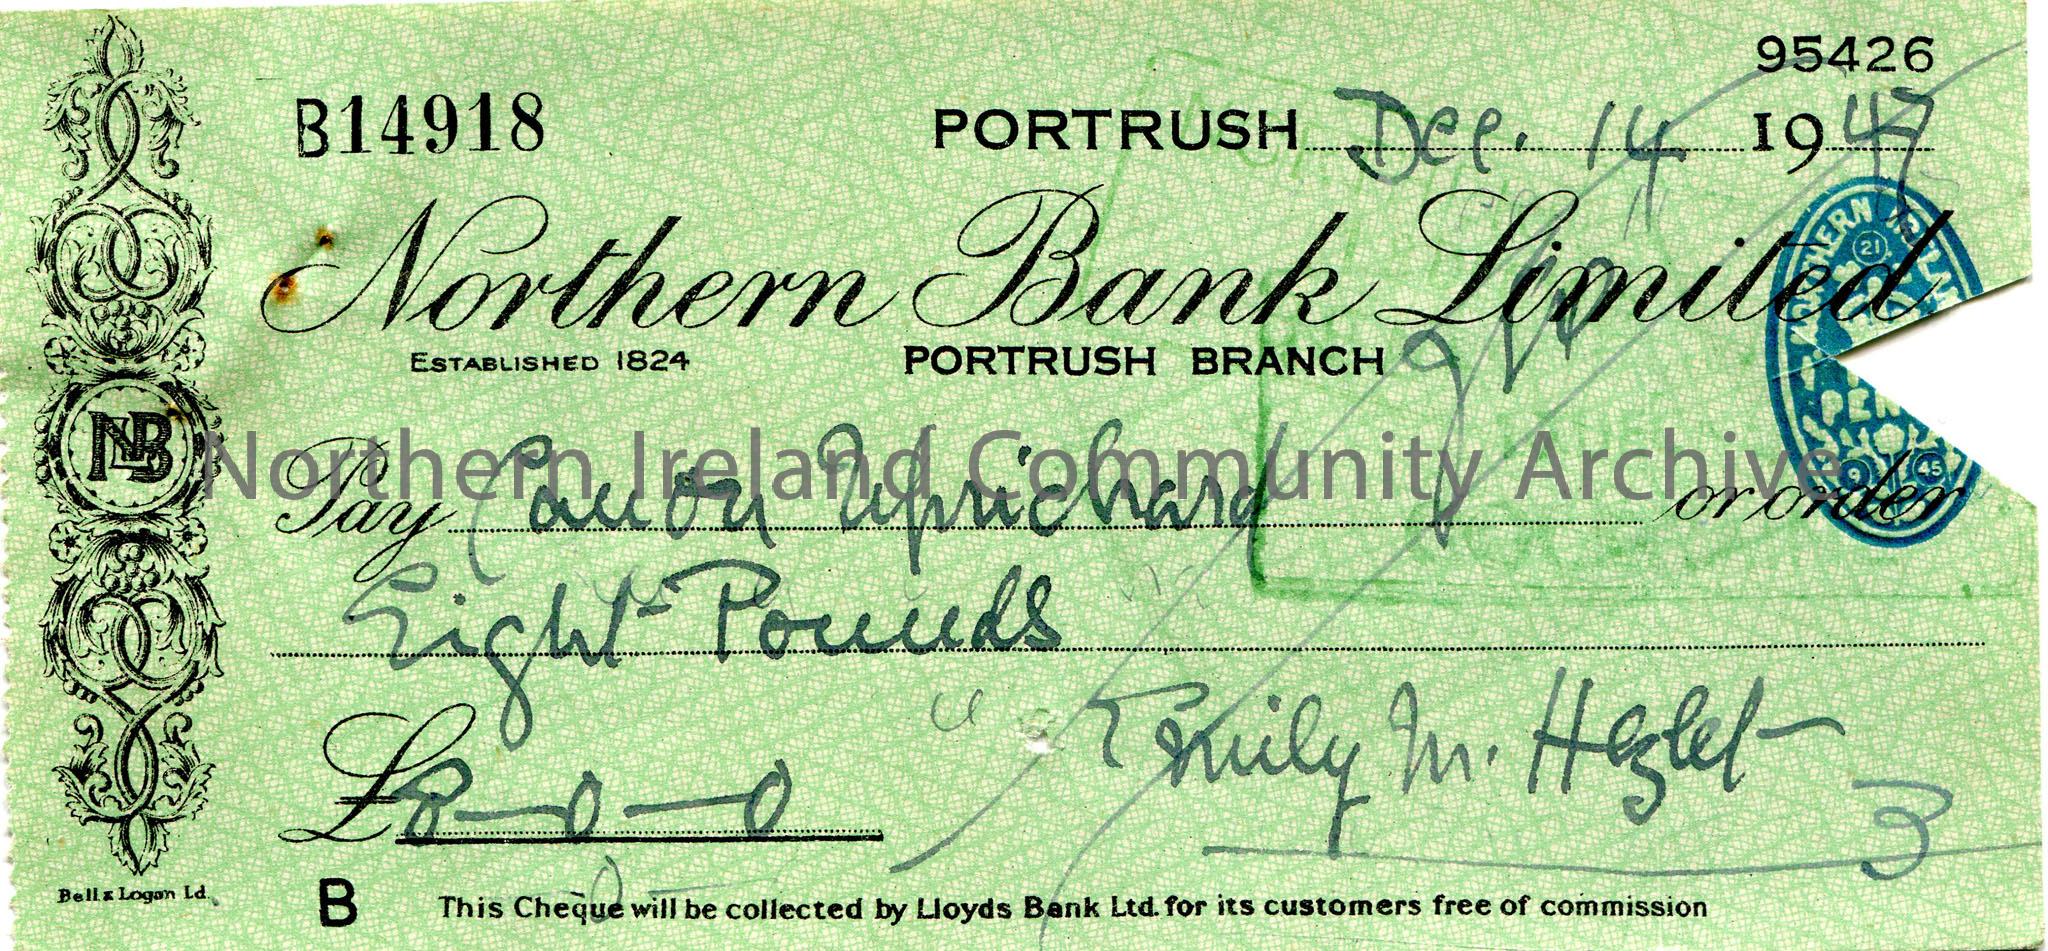 Handwritten Northern Bank Limited, Portrush branch cheque, no B14918. Payable to Canon Uprichard from Emily M. Hezlet for £8.0.0. Dated 14th Dece…